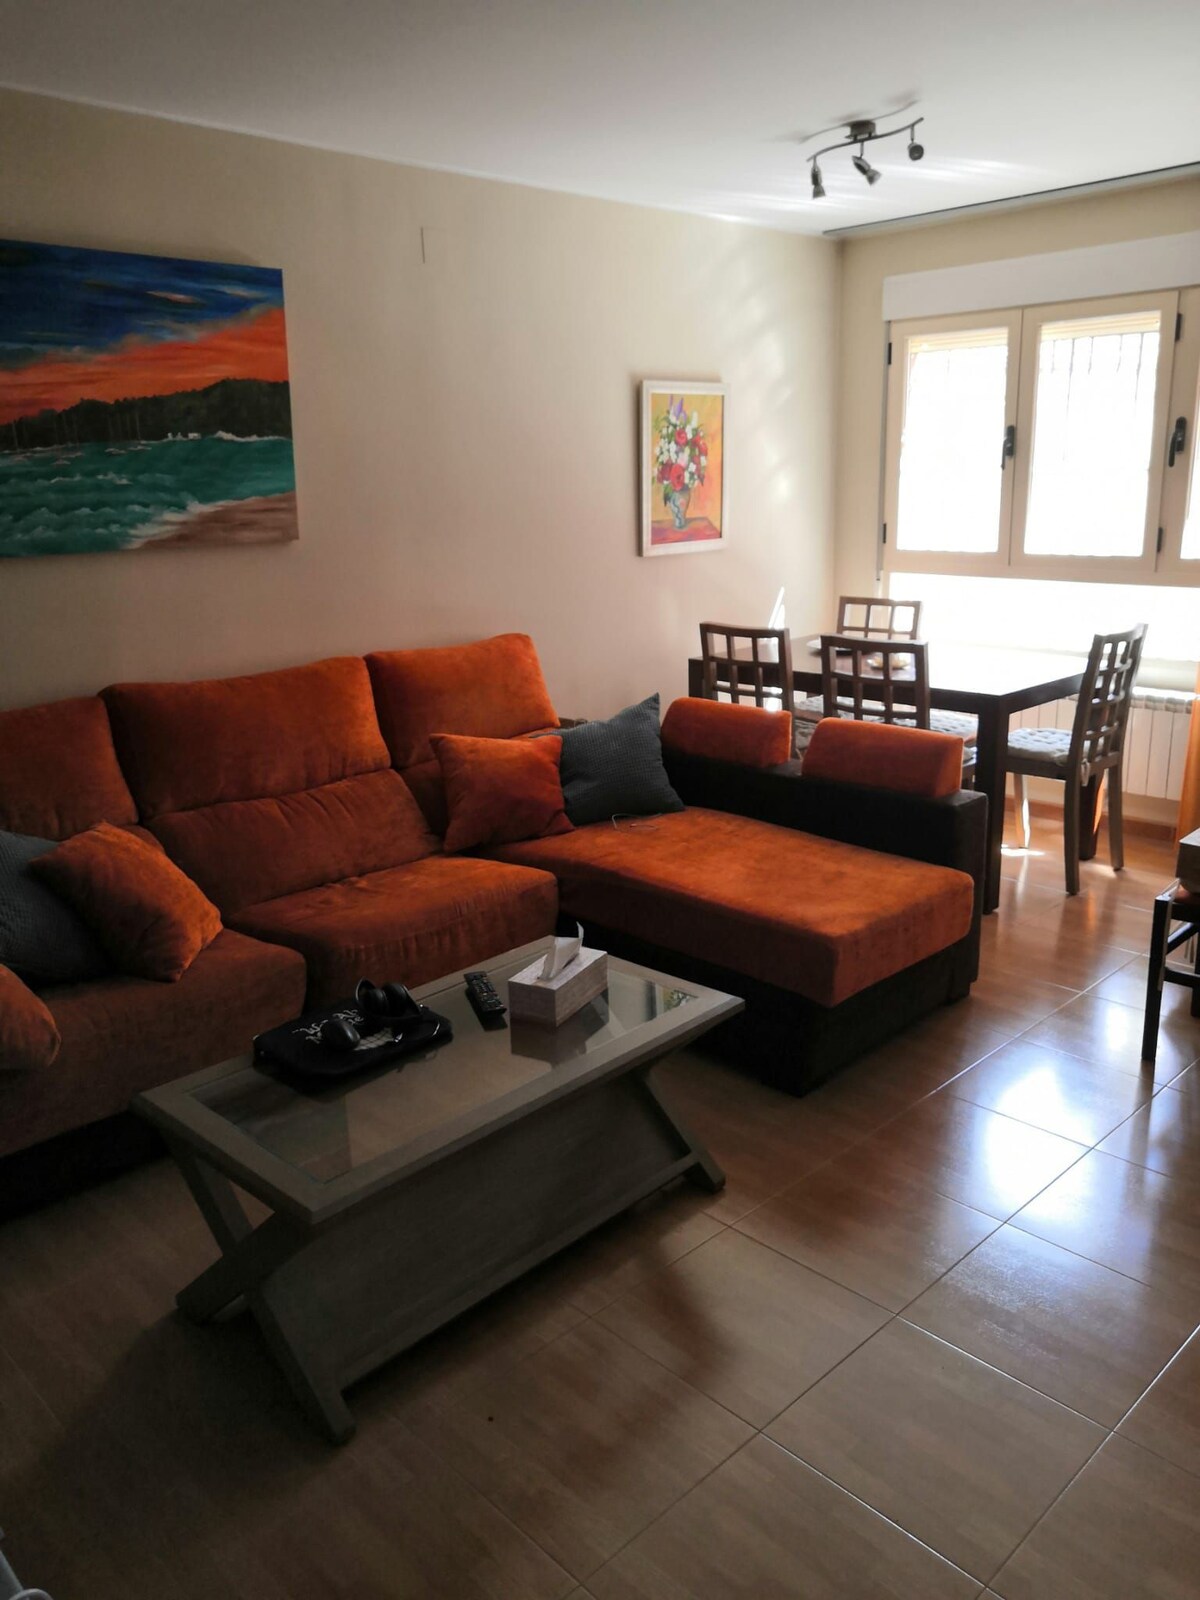 Villarrobledo Furnished Monthly Rentals and Extended Stays | Airbnb